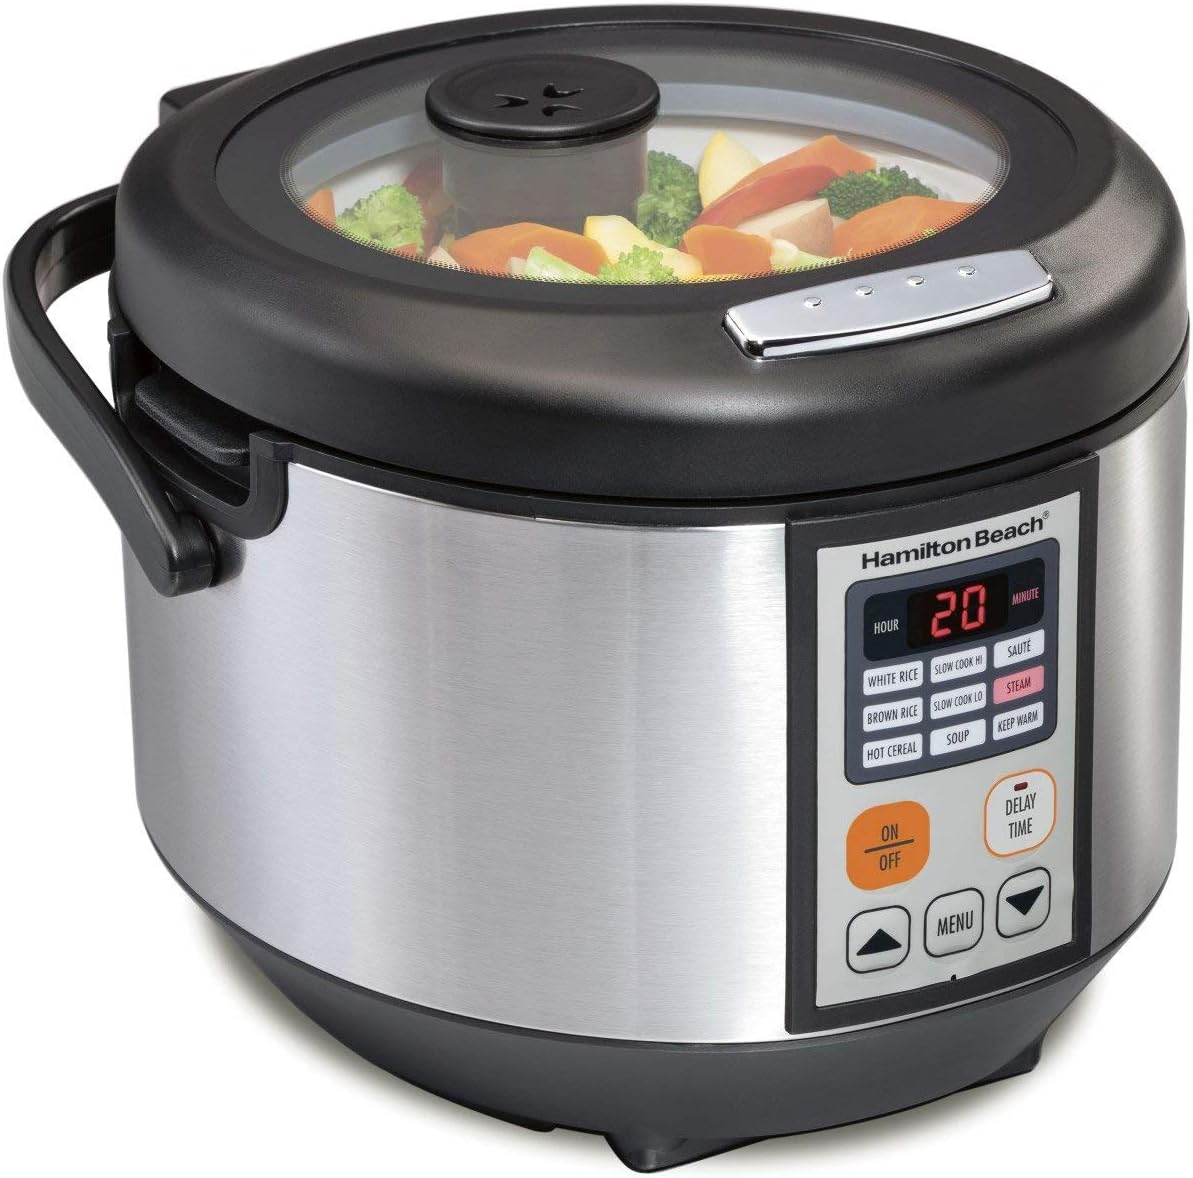 Hamilton Beach Digital Programmable Rice and Slow Cooker & Food Steamer, 20 Cups Cooked (10 Cups Uncooked), 12 Pre-Programmed Settings for Sauté, Hot Cereal, Soup, Nonstick Pot, Stainless Steel (37523)